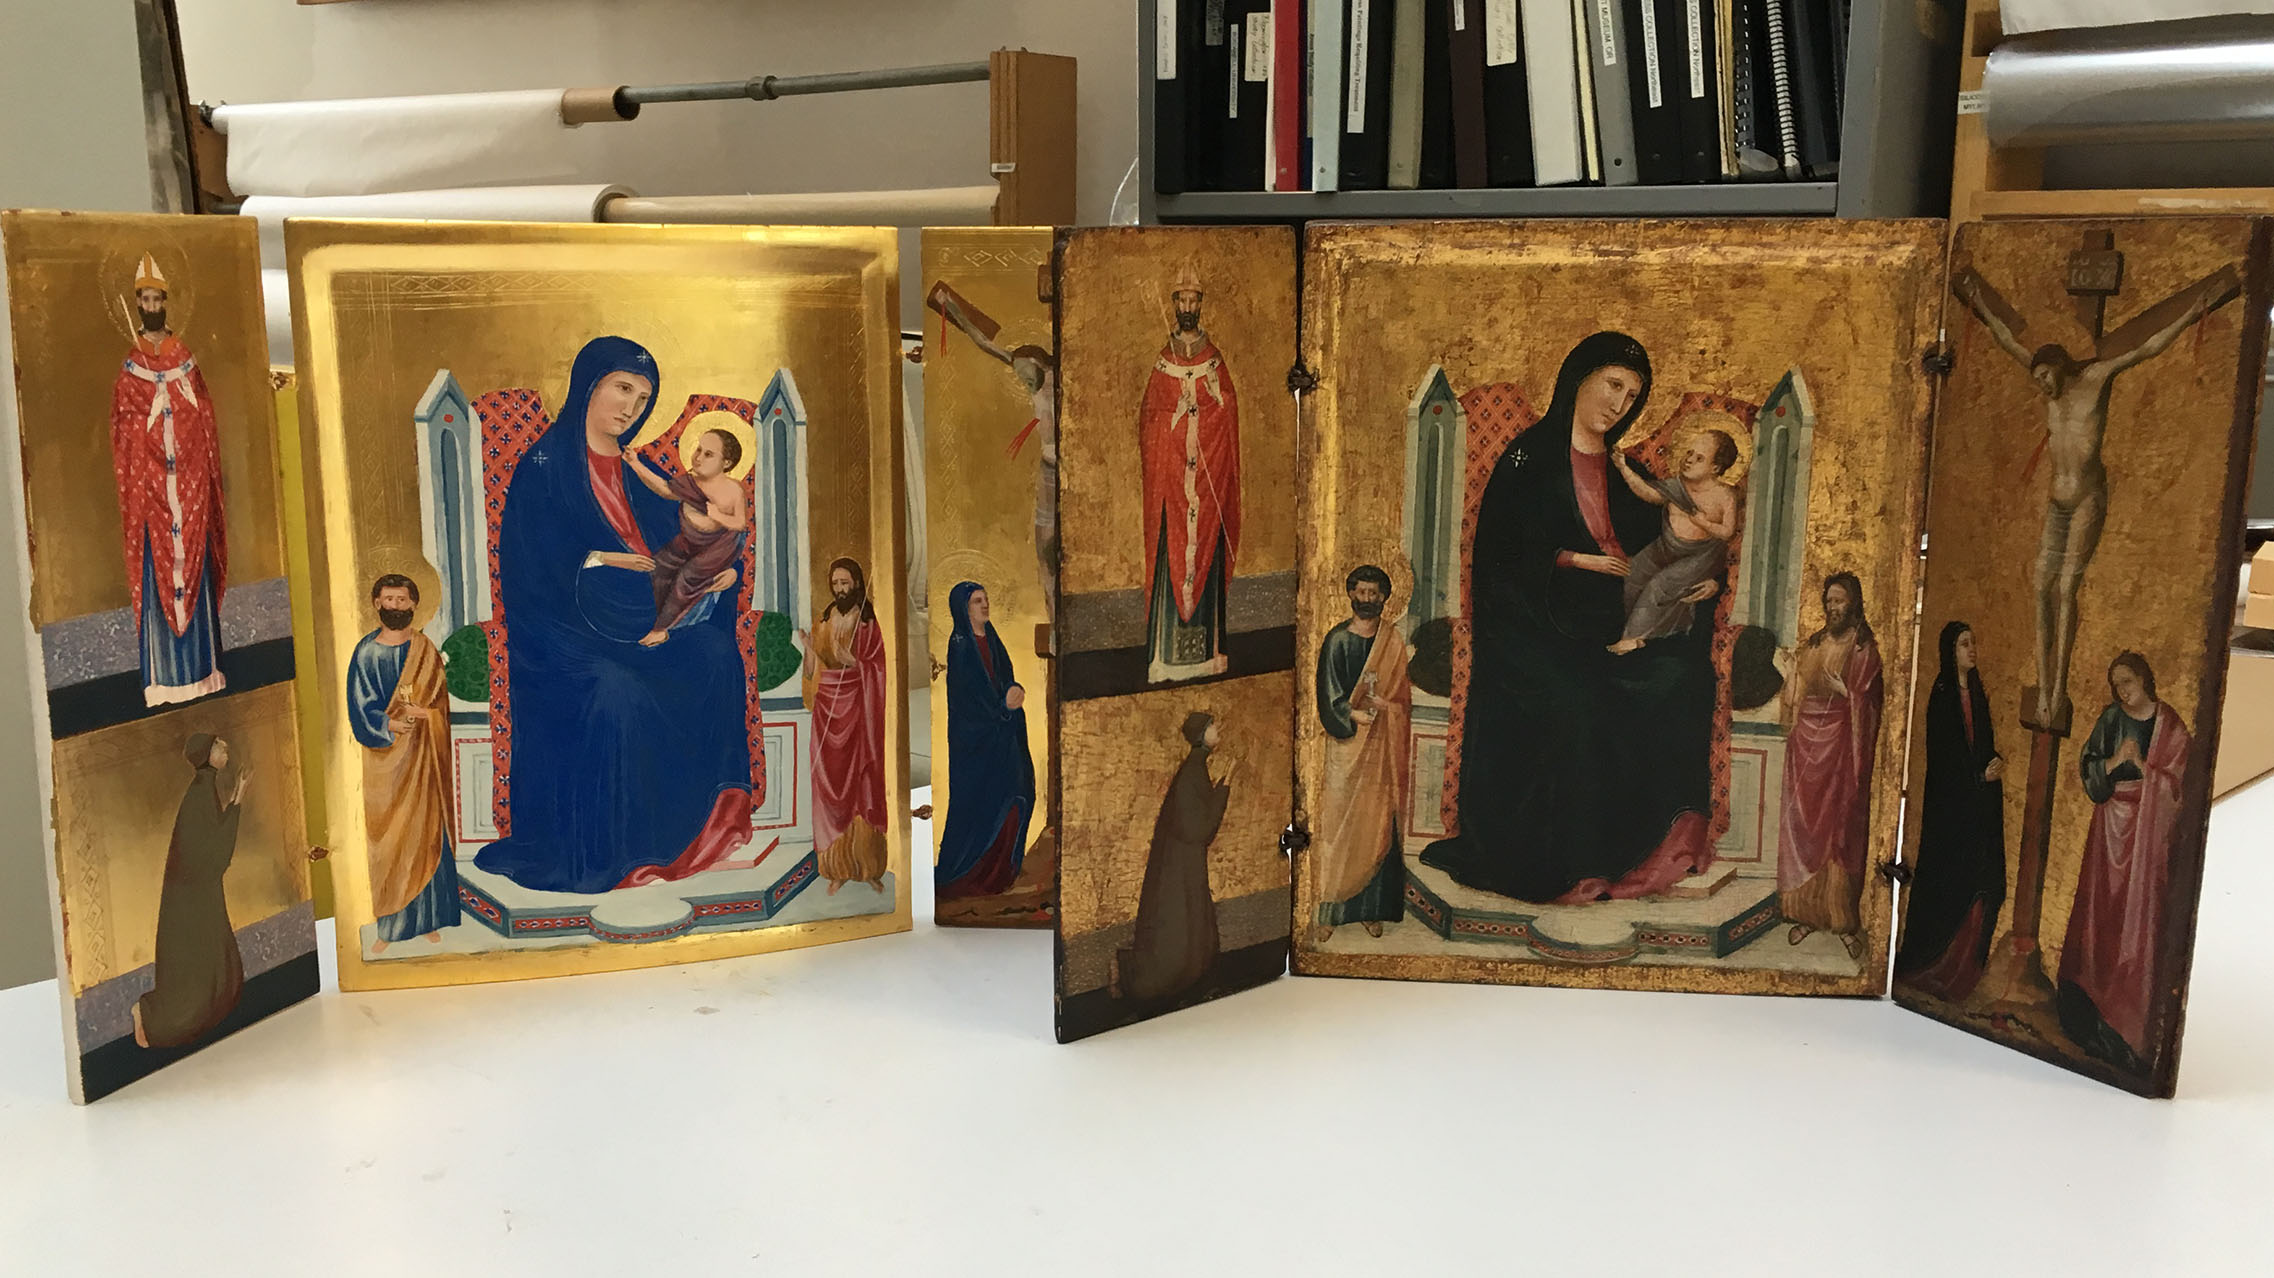 Reconstruction (left) of the Madonna and Child with Saints and the Crucifixion (right)